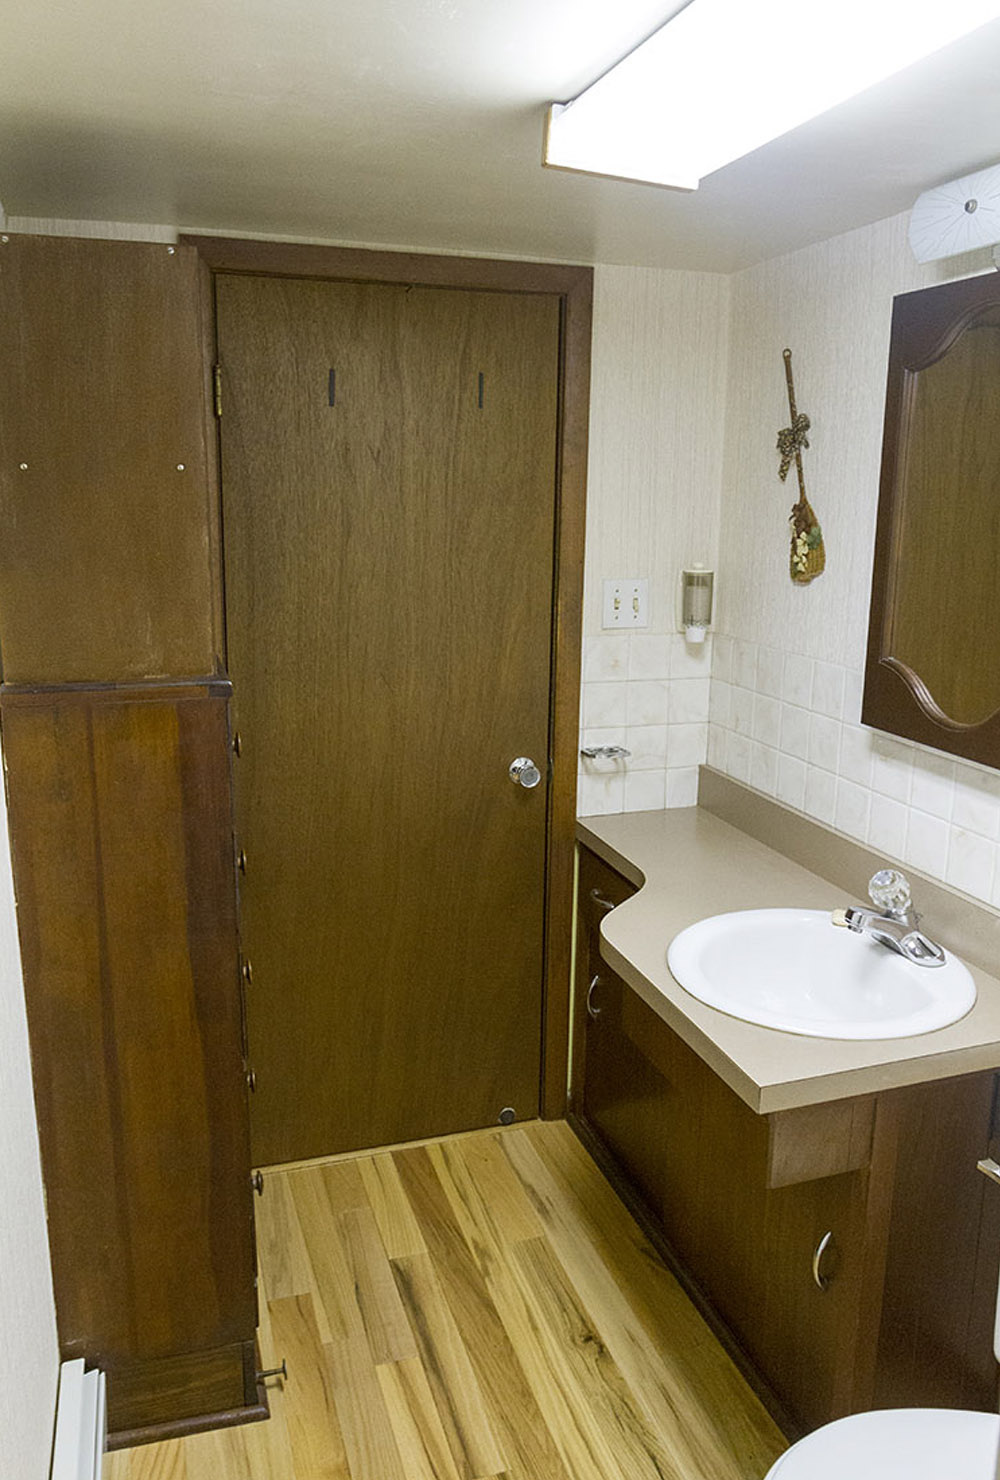 A bathroom with a brown wooden door, wooden cabinet, brown vanity, wood flooring and a beige, tiled wall with a mirror.